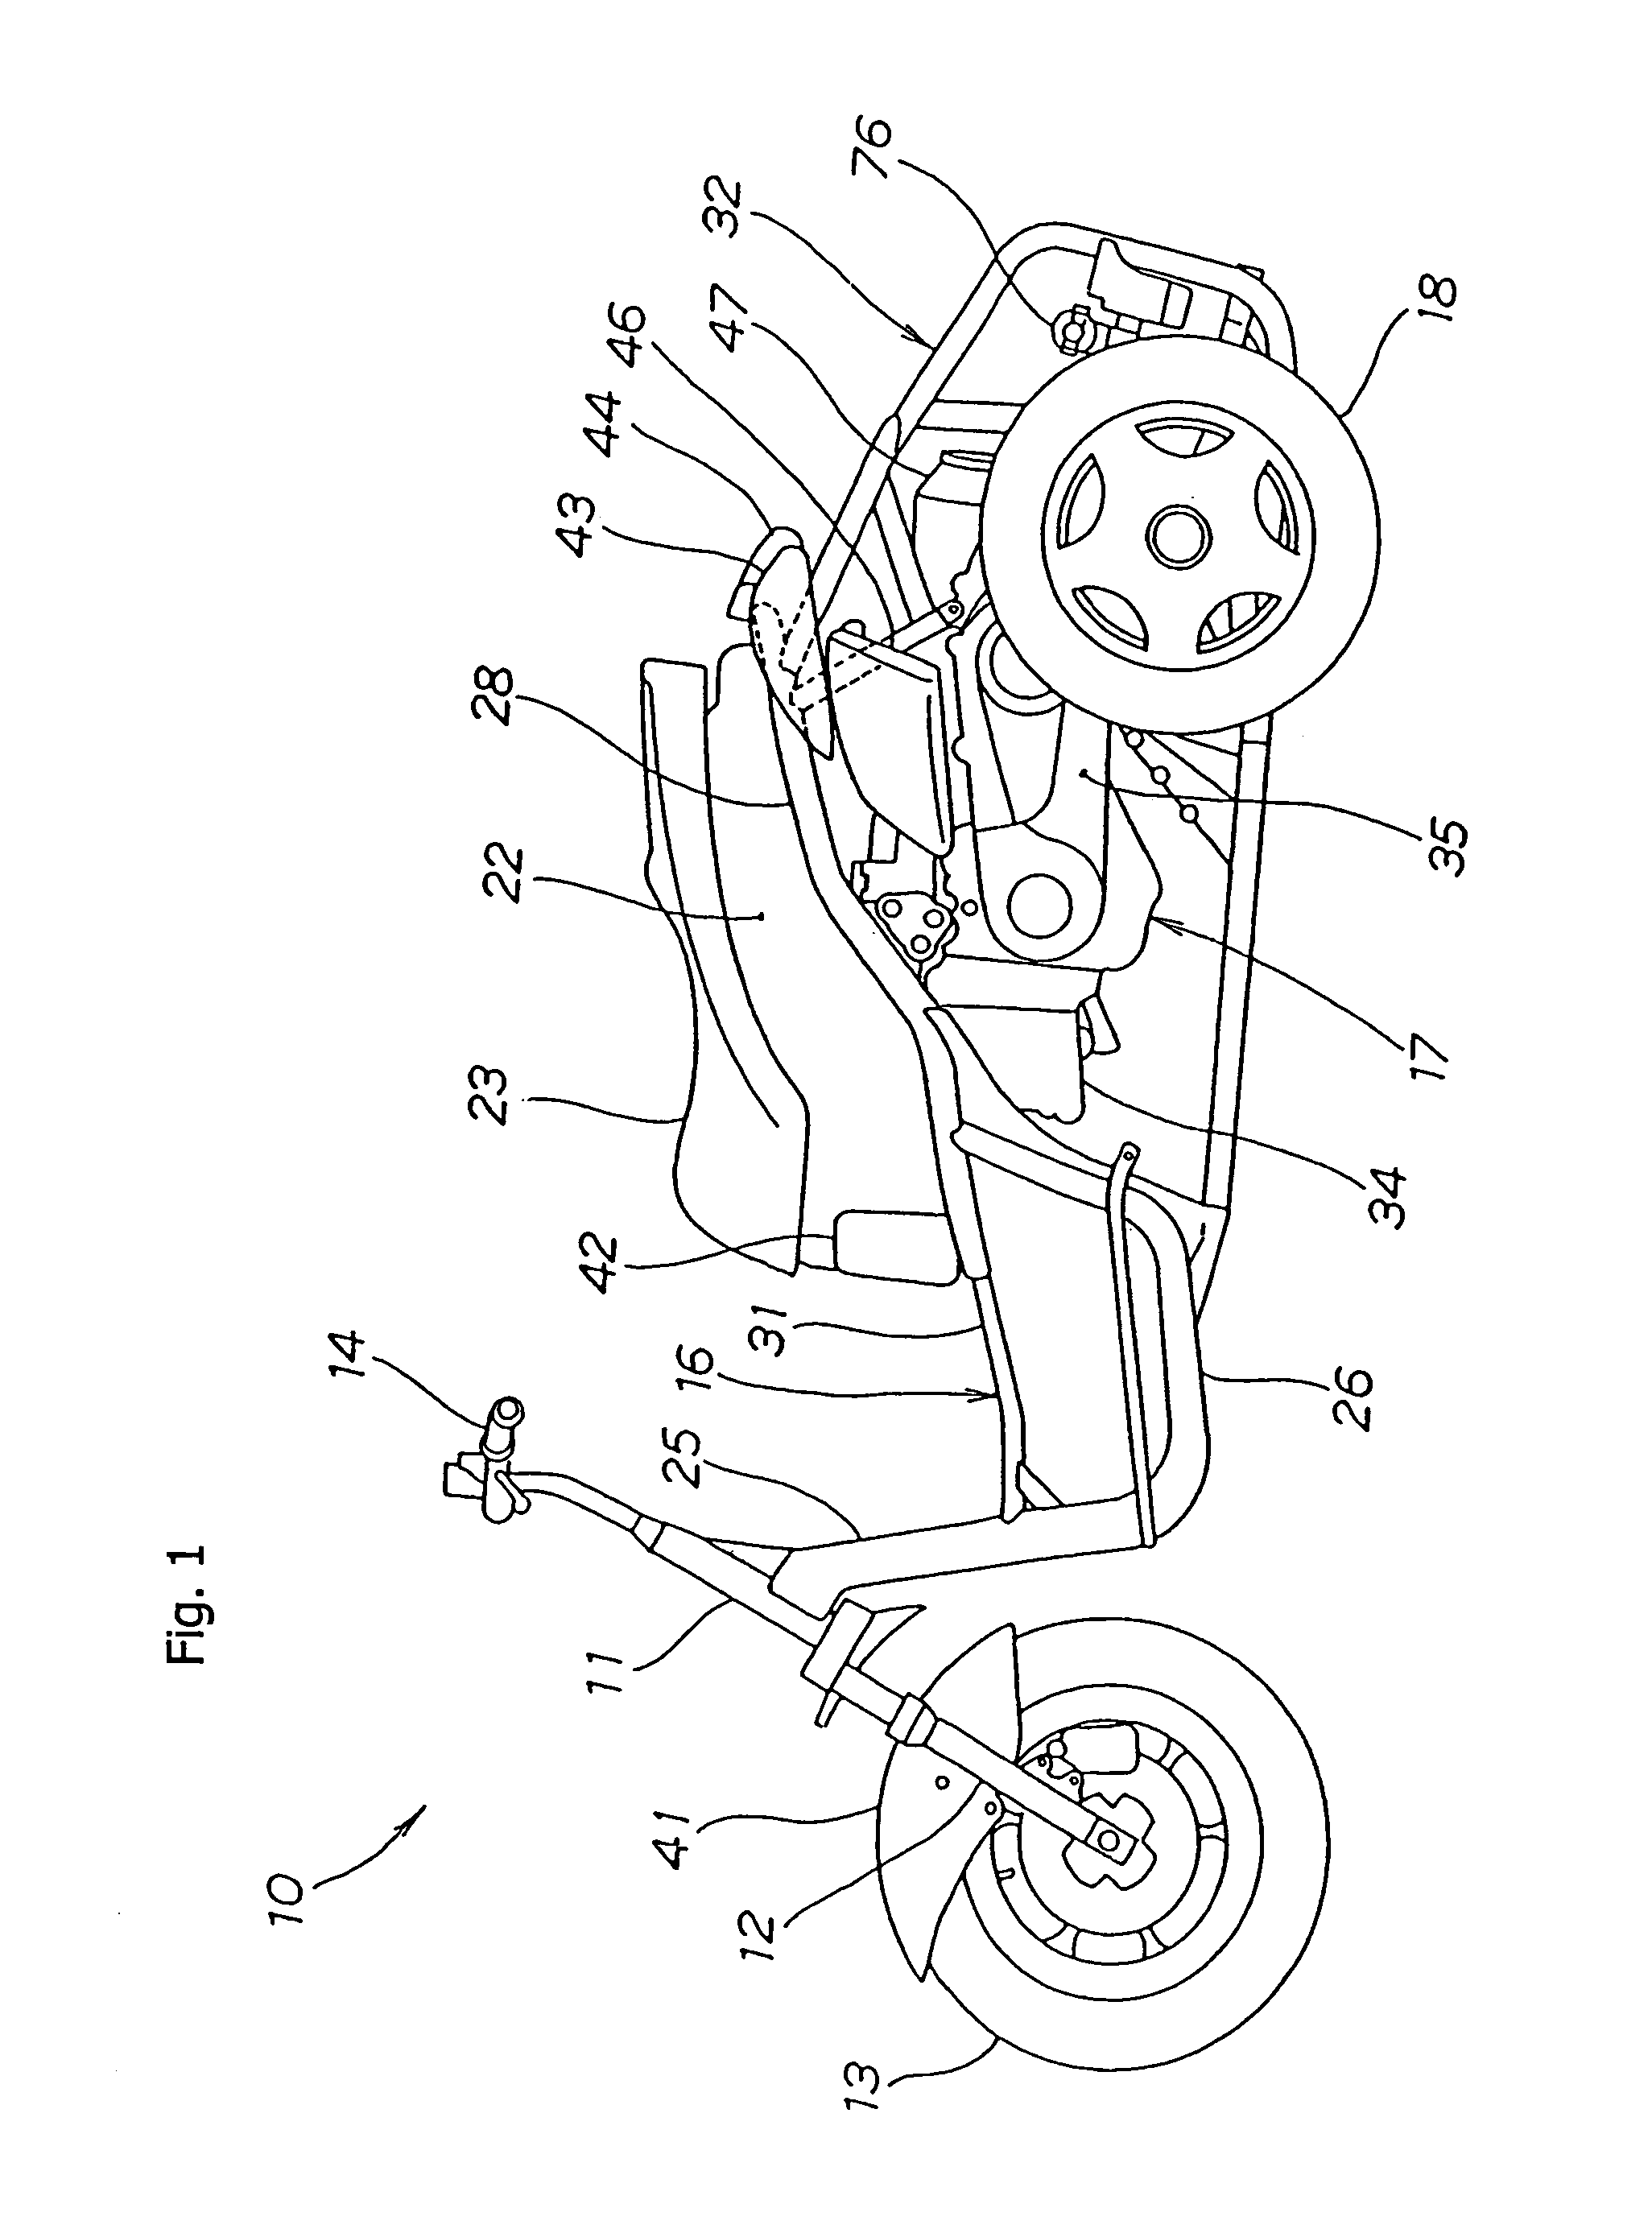 Reinforcing support structure for a three-wheeled motor vehicle, and three-wheeled motor vehicle incorporating same